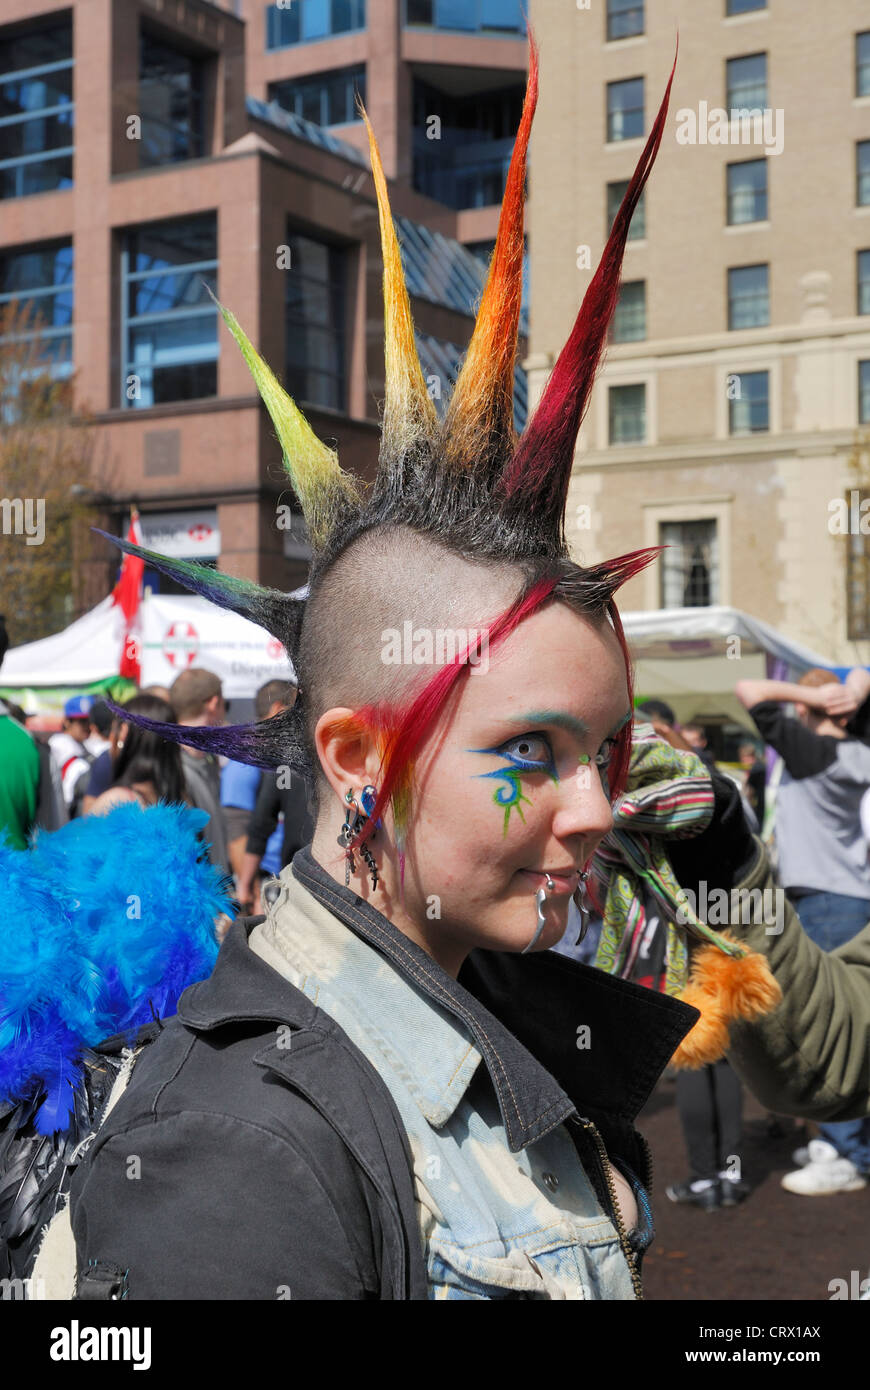 Female with the side of her hair shaved and the top colorfully spiked attending the annual 4 20 in Vancouver. Stock Photo